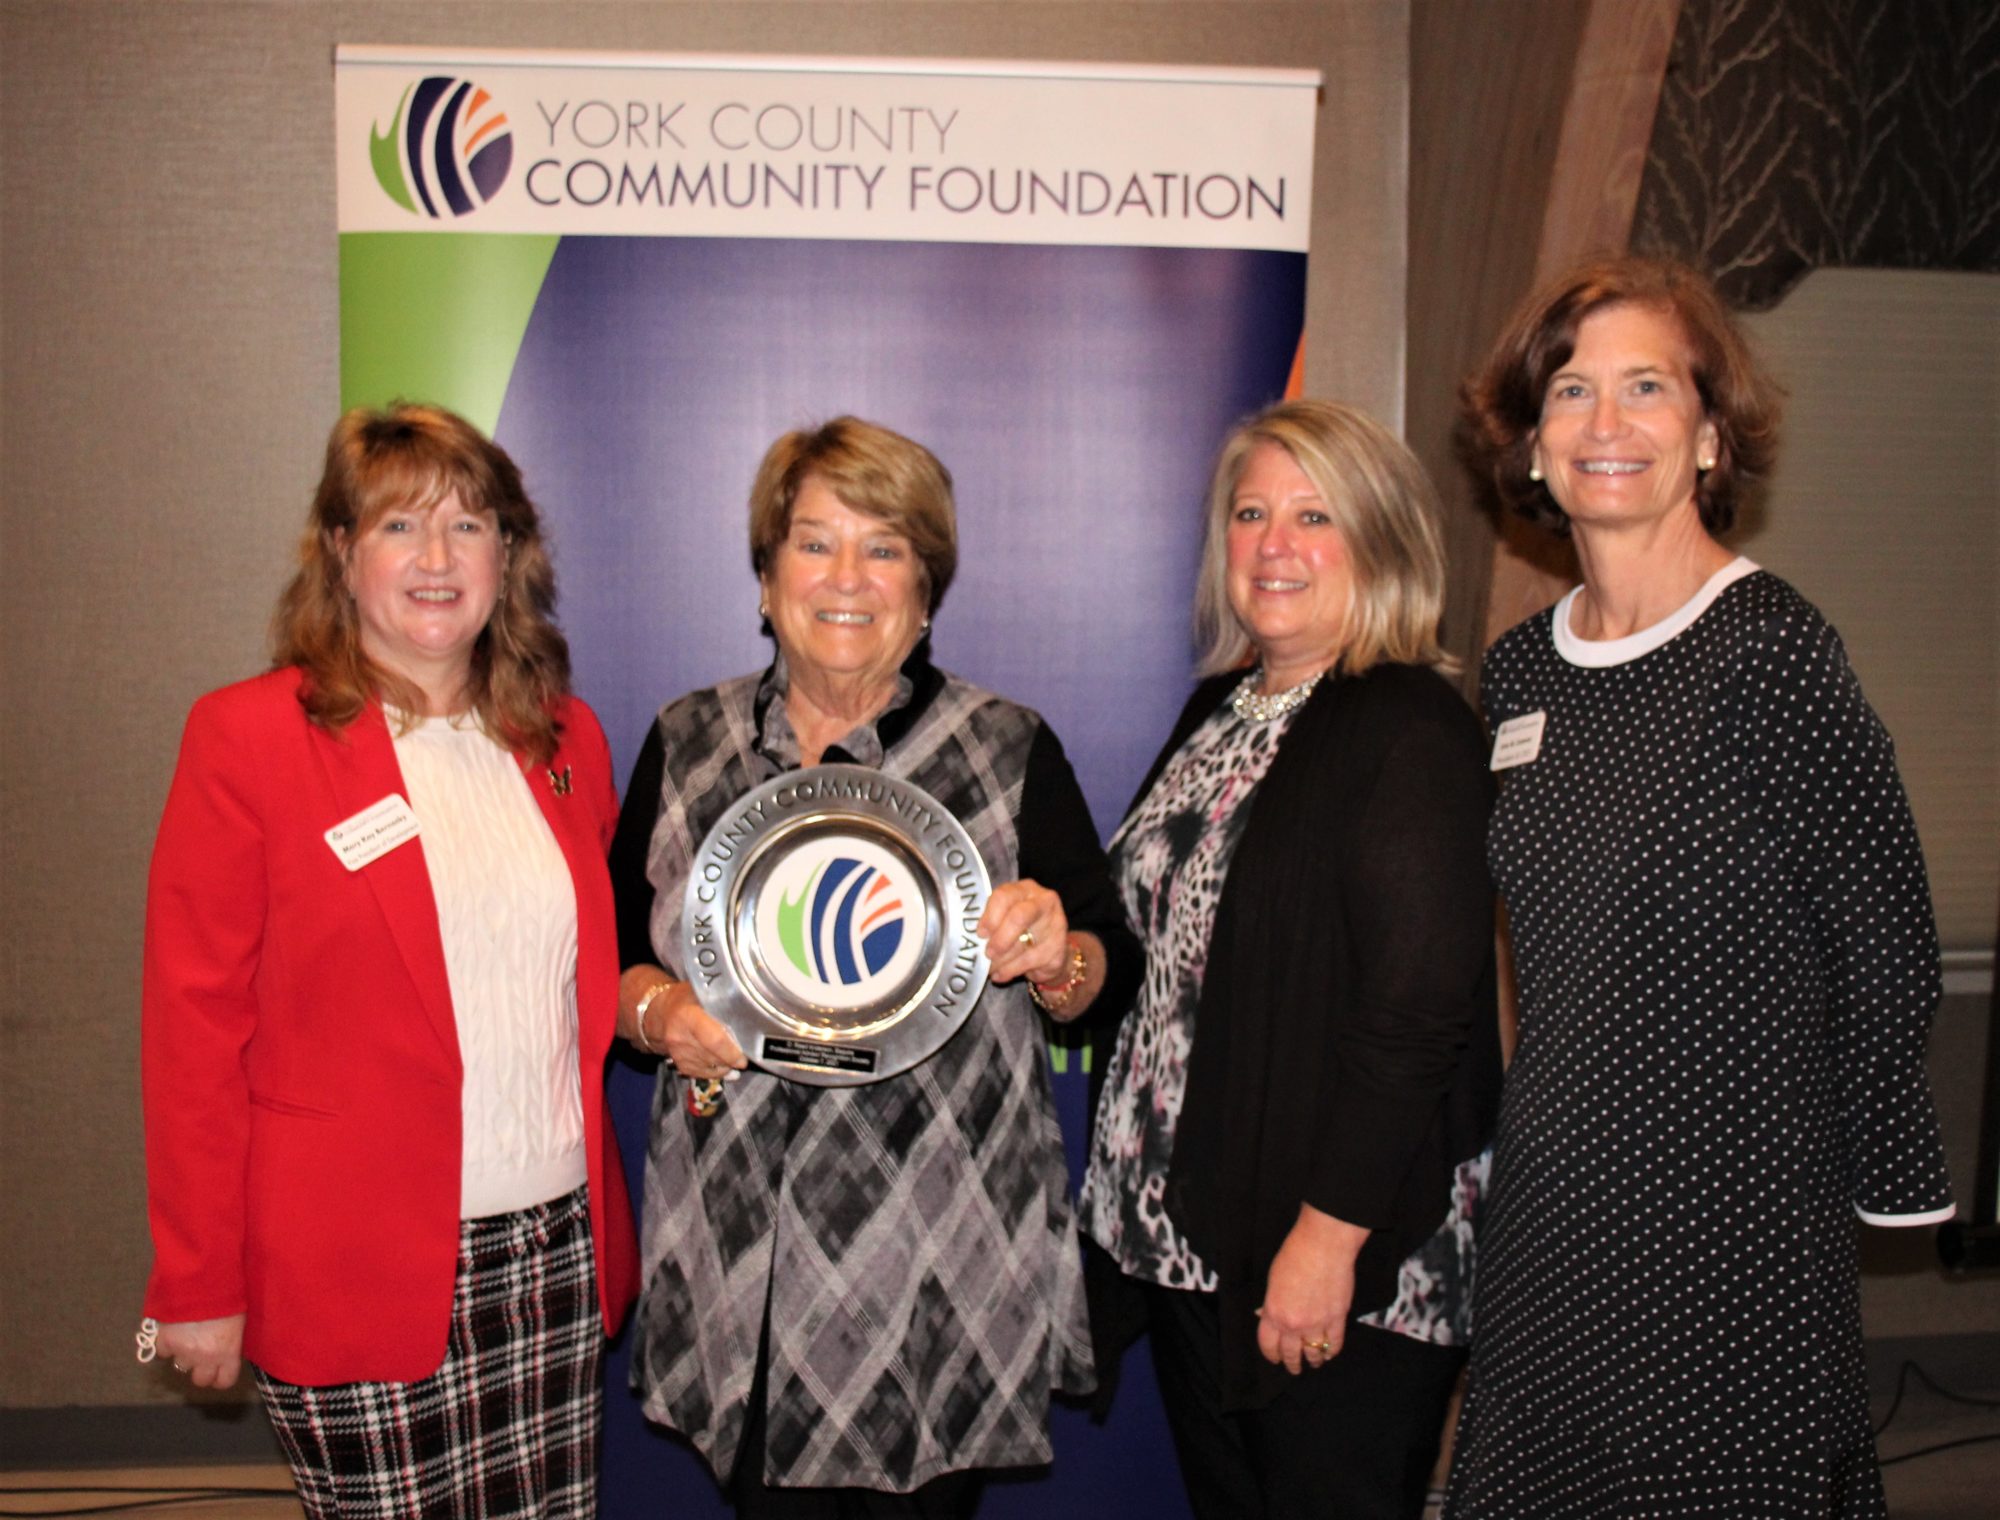 York County Community Foundation Honors Reed Anderson at Annual Professional Advisor Event